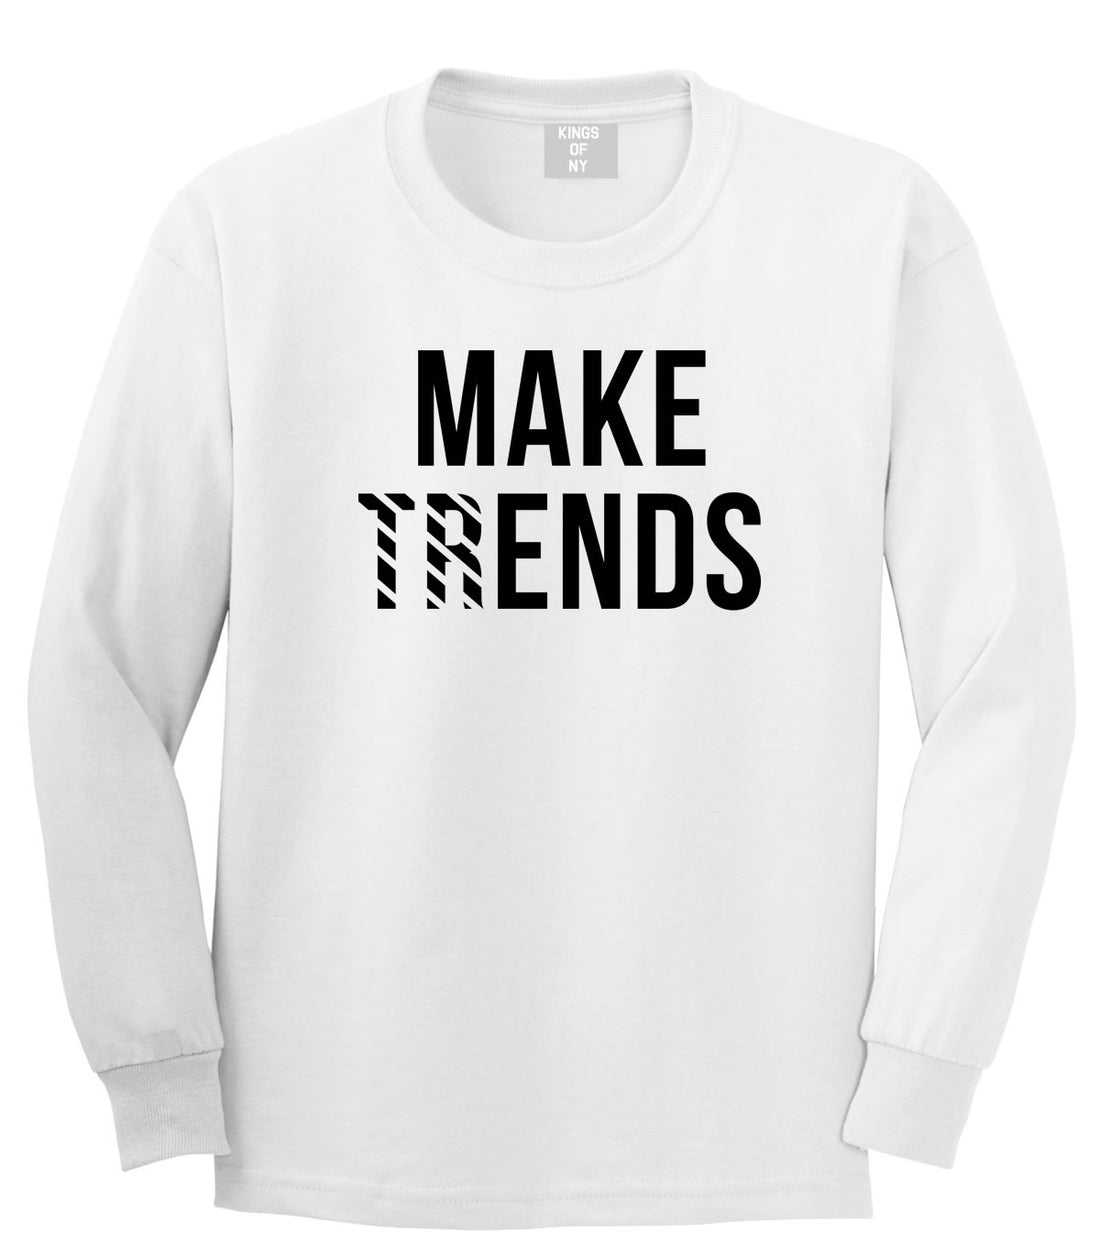 Make Trends Make Ends Long Sleeve T-Shirt in White by Kings Of NY